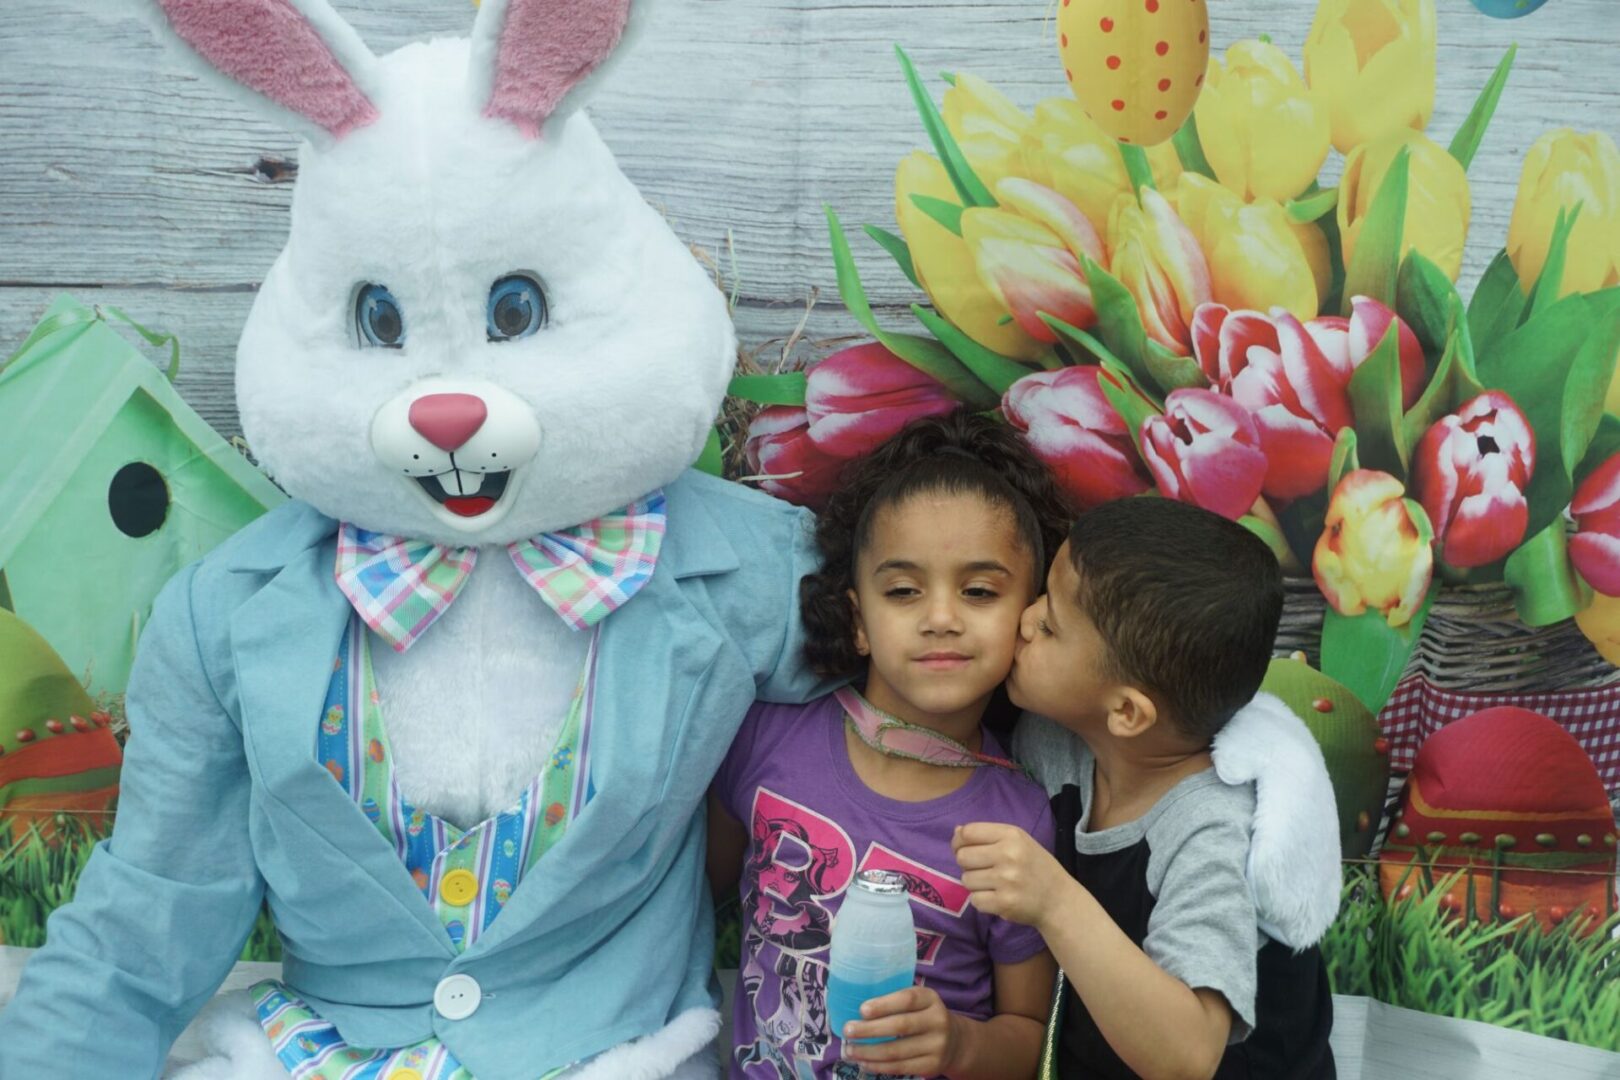 The bunny mascot together with a girl holding a drink and a boy kissing the girl on the cheek (2)